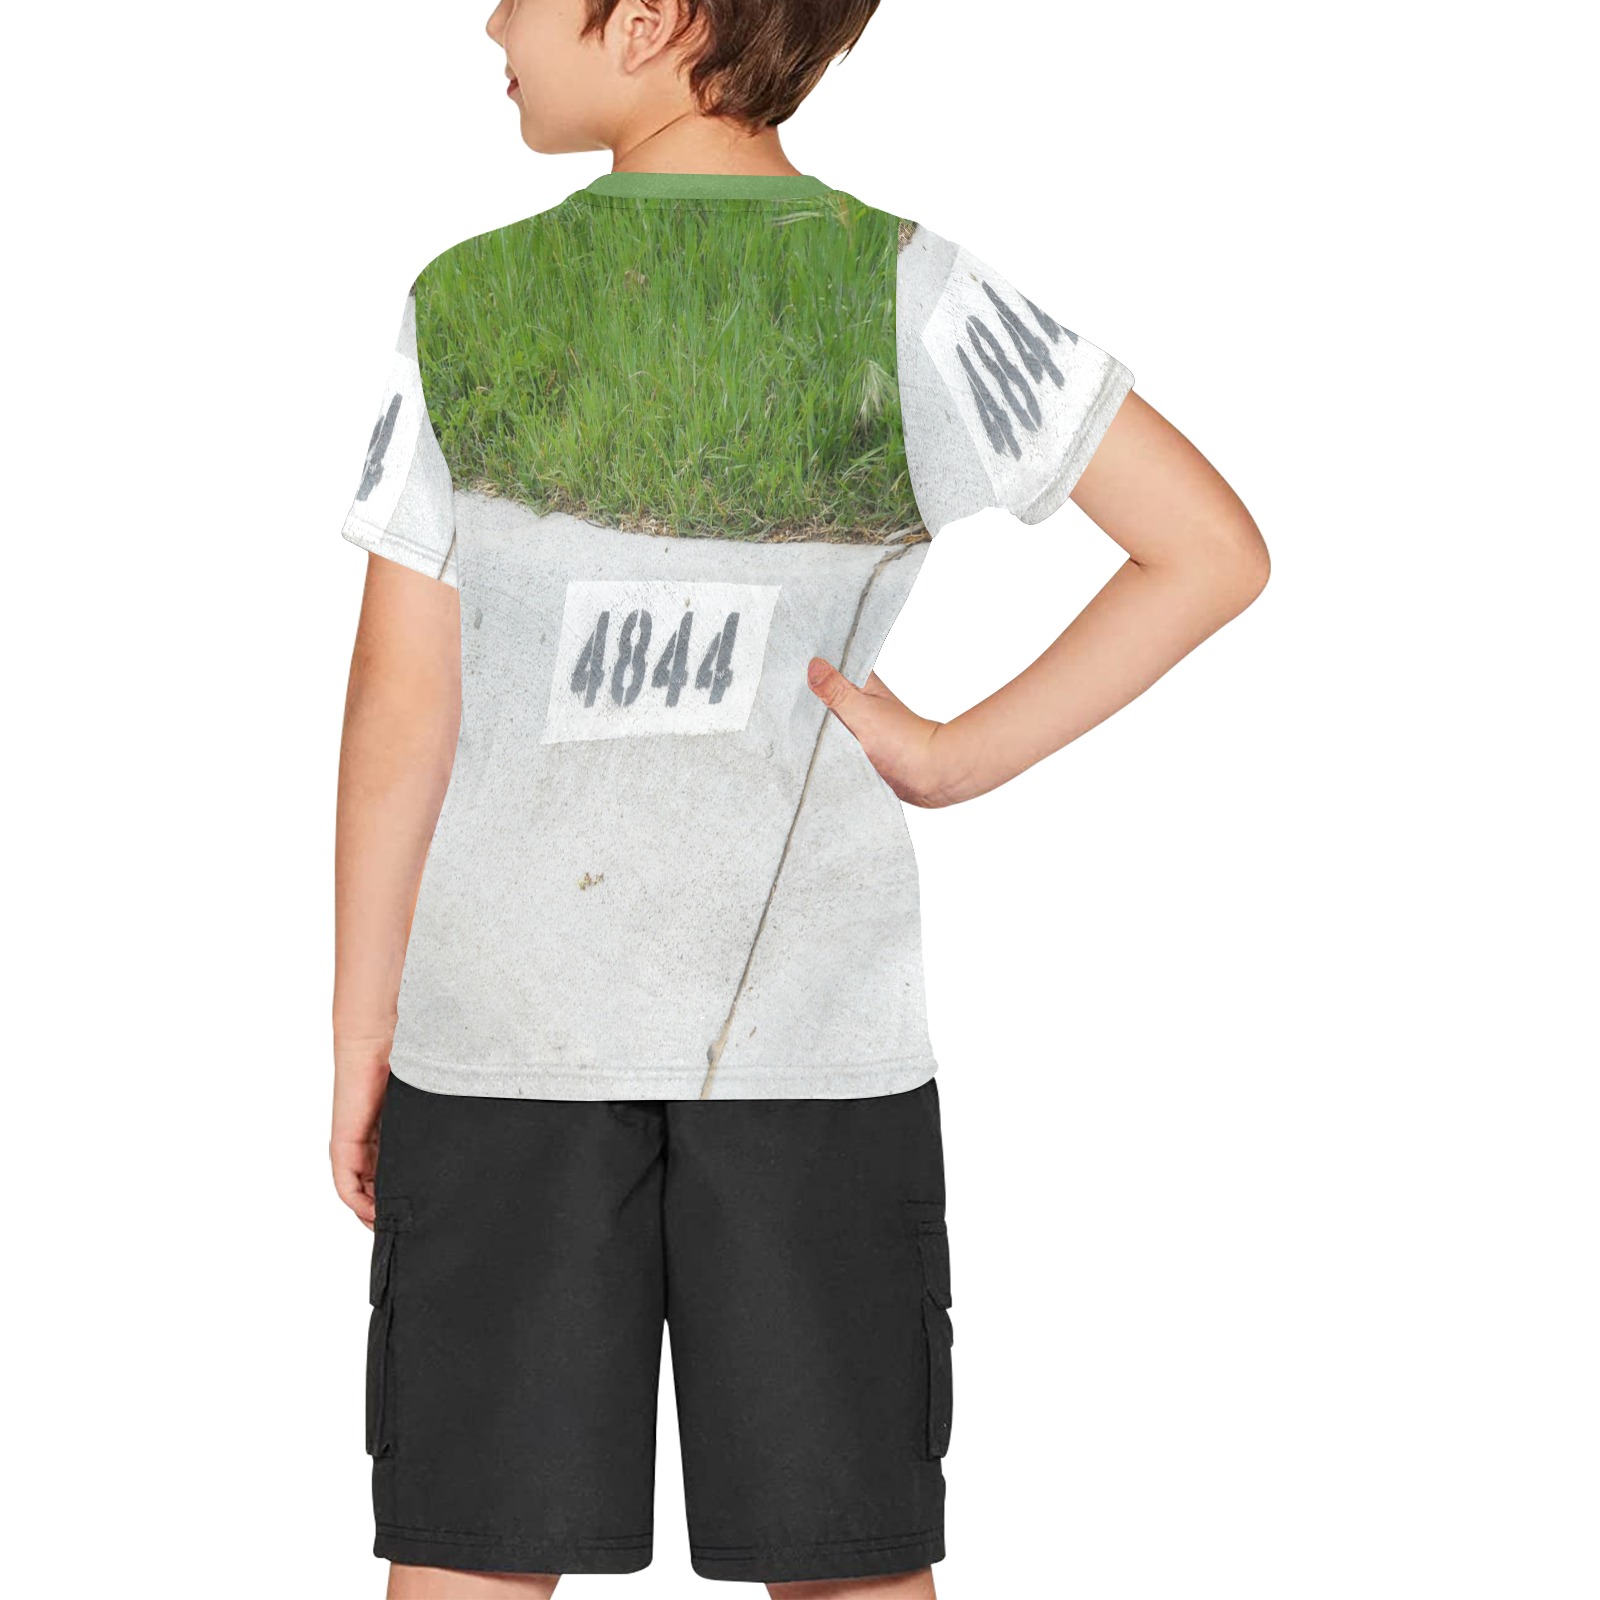 Street Number 4844 with green collar Big Boys' All Over Print Crew Neck T-Shirt (Model T40-2)